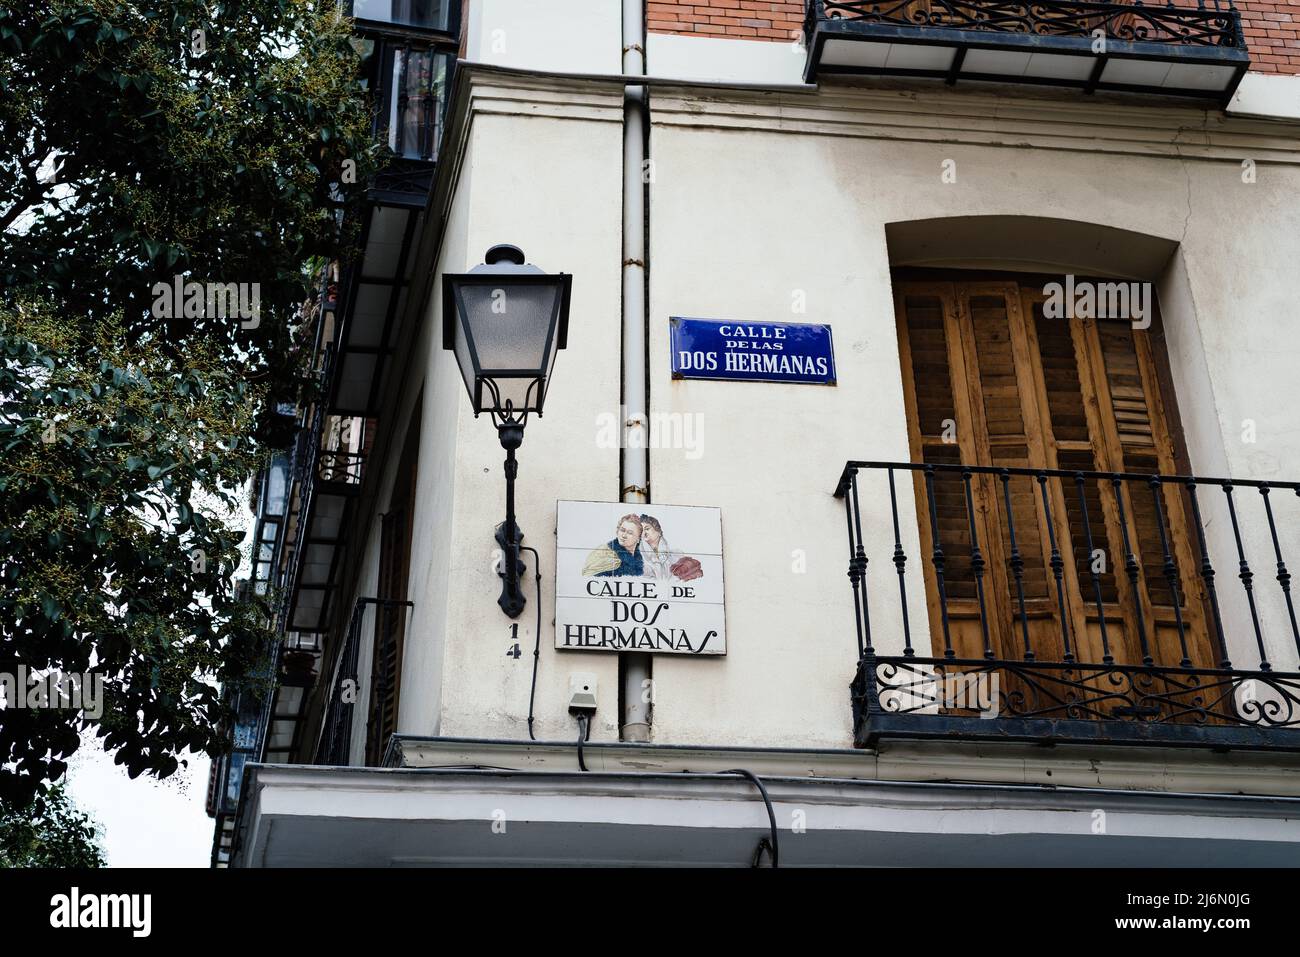 Madrid, Spain - October 4, 2020: Historic street name sign in Lavapies neighborhood in central Madrid. Stock Photo